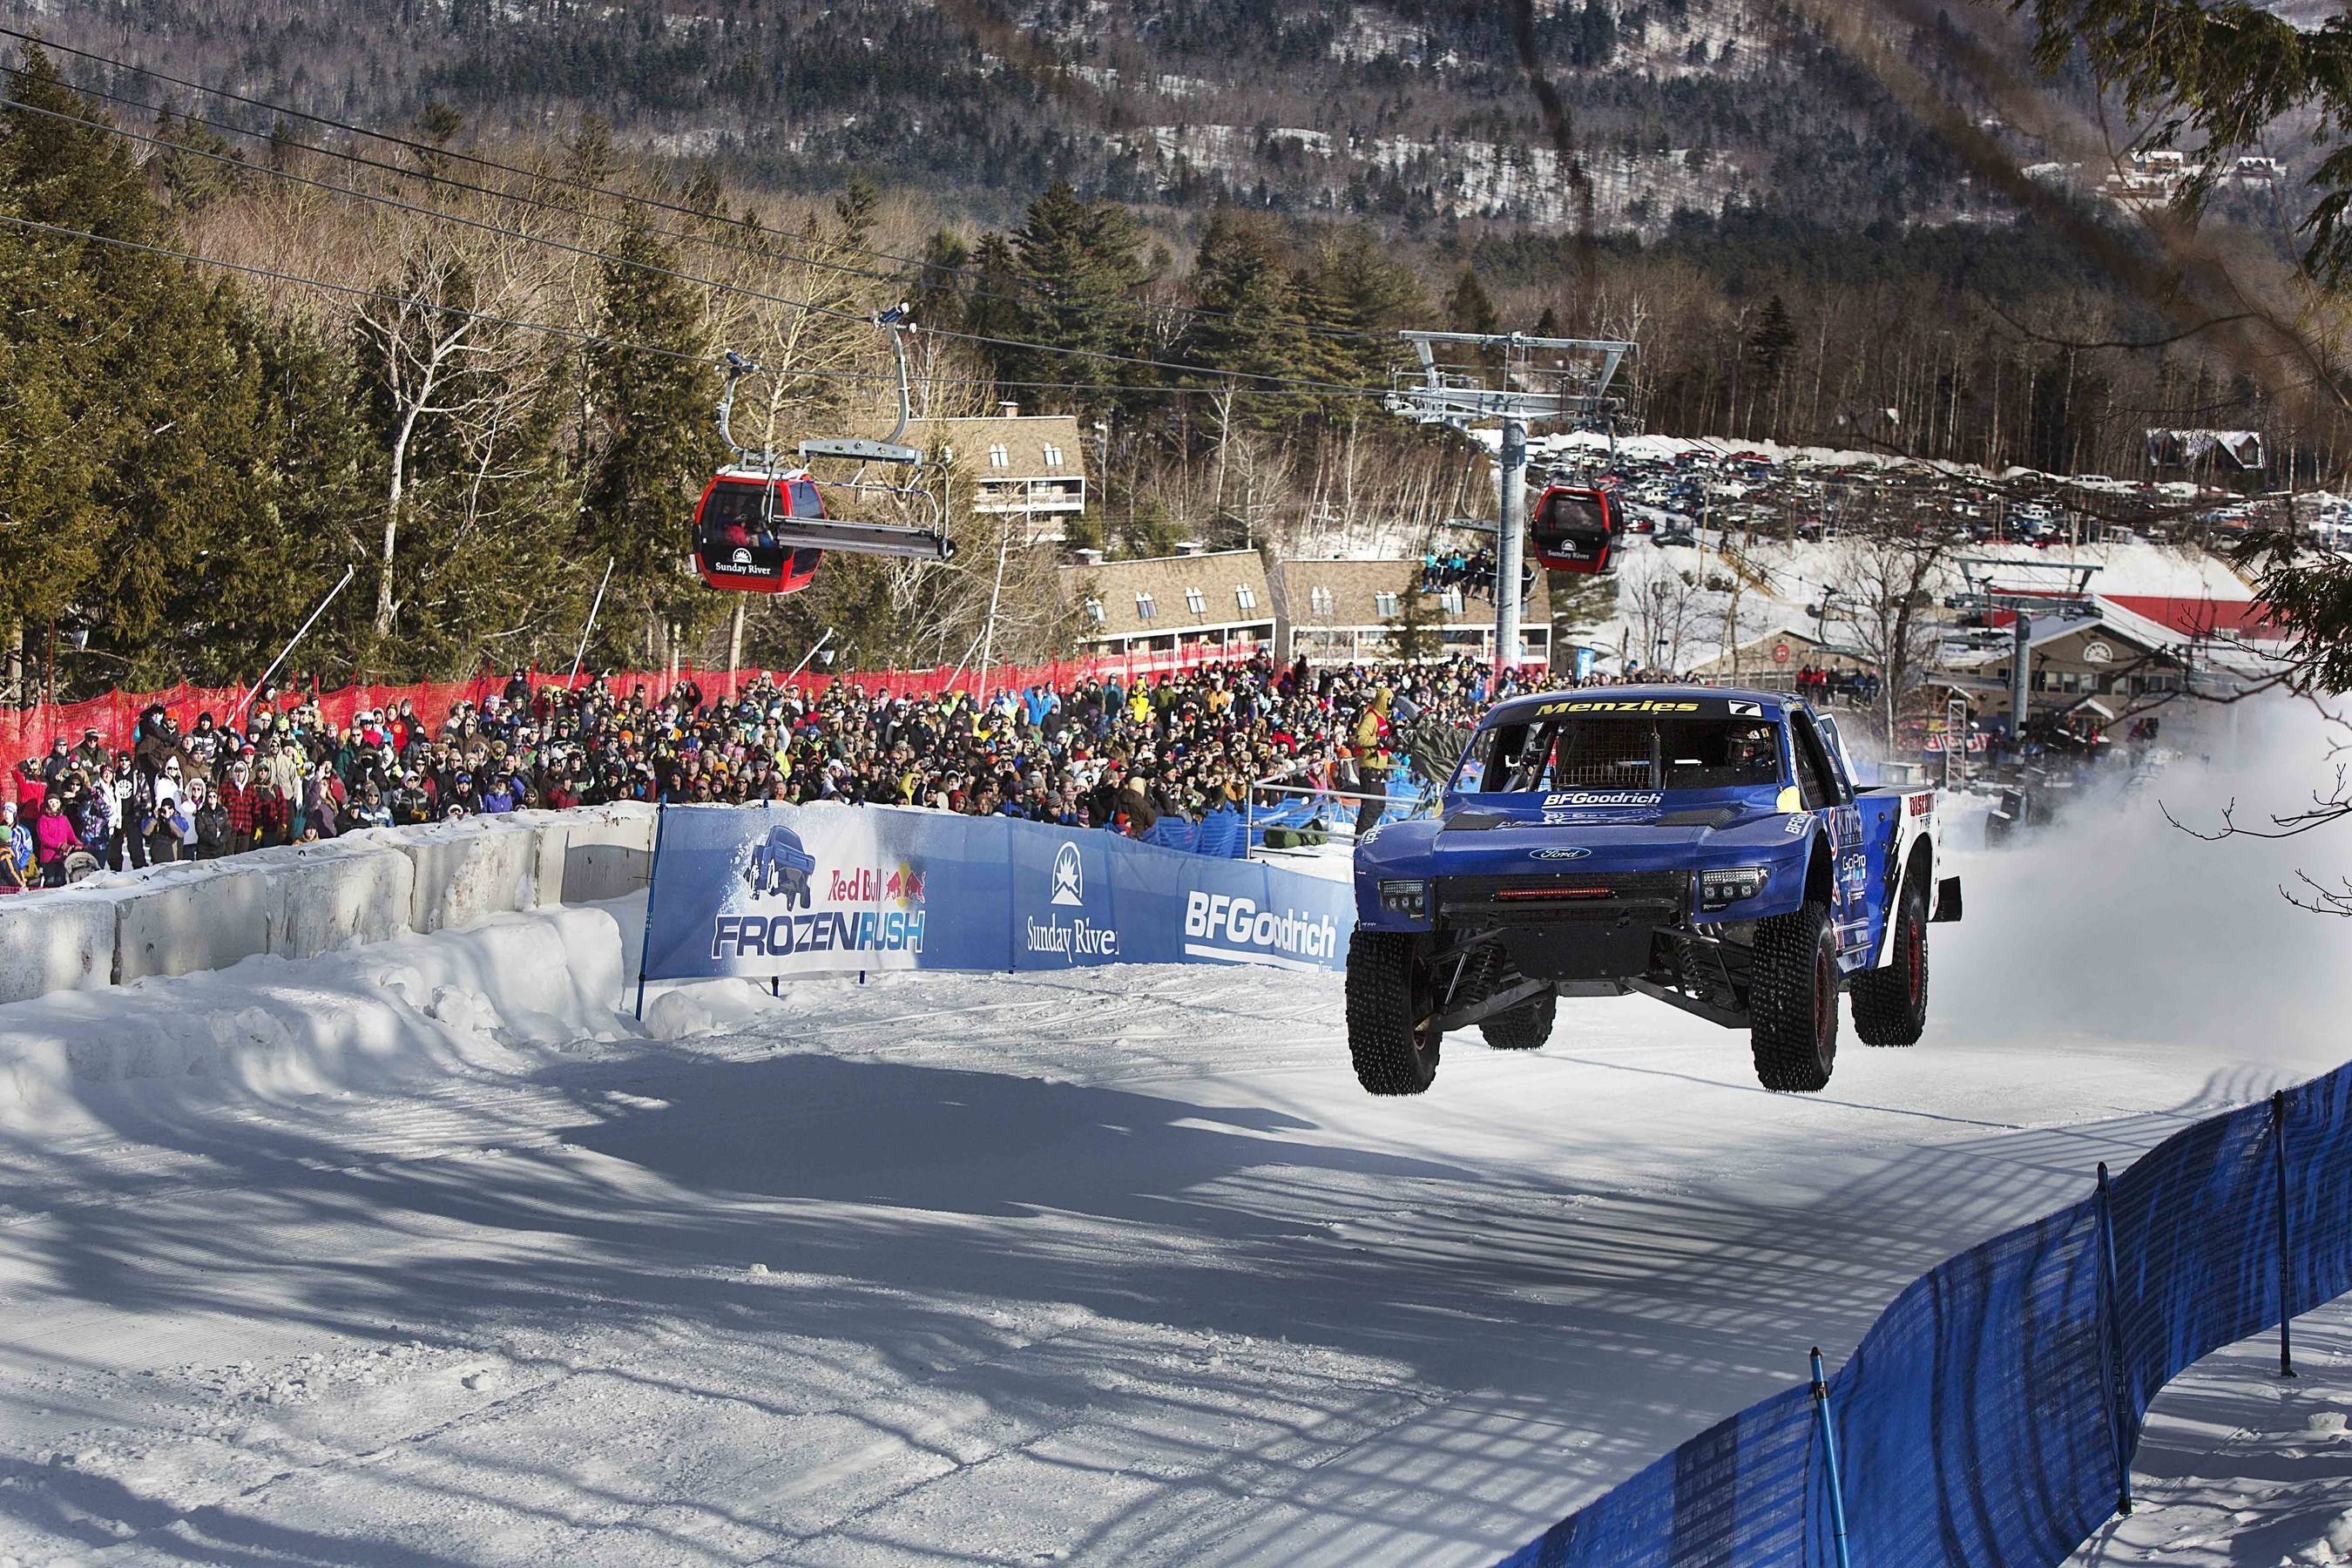 A new dawn of Motorsports with Off-Road Trucks racing head-to-head on Snow for Red Bull Frozen Rush at Sunday River Ski Resort in Maine.